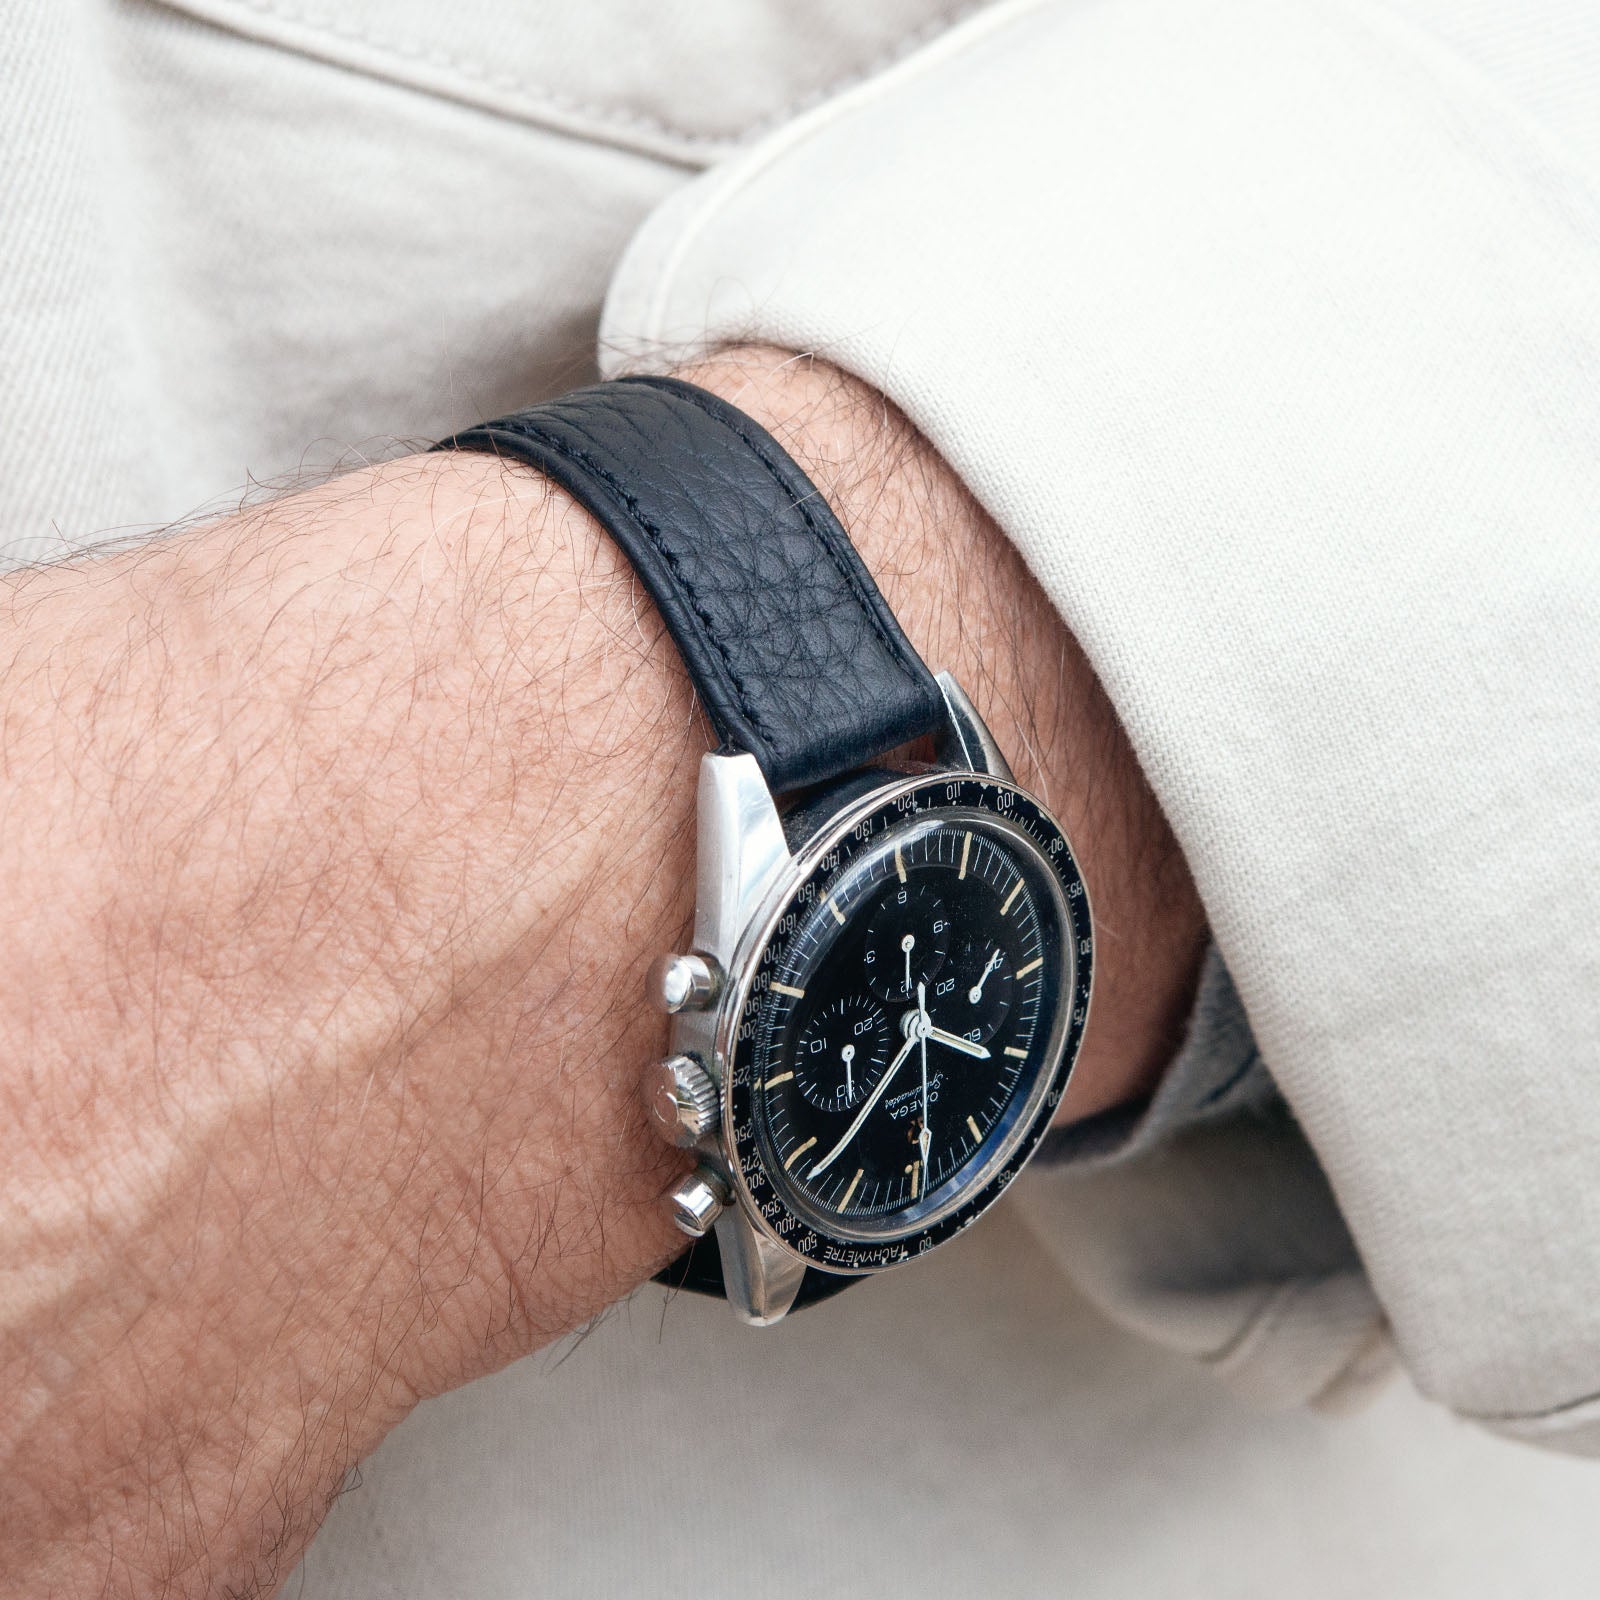 Bulang and Sons_Strap Guide_The Omega Straight Lugs speedmaster_Taurillon Black Speedy Leather Watch Strap-1